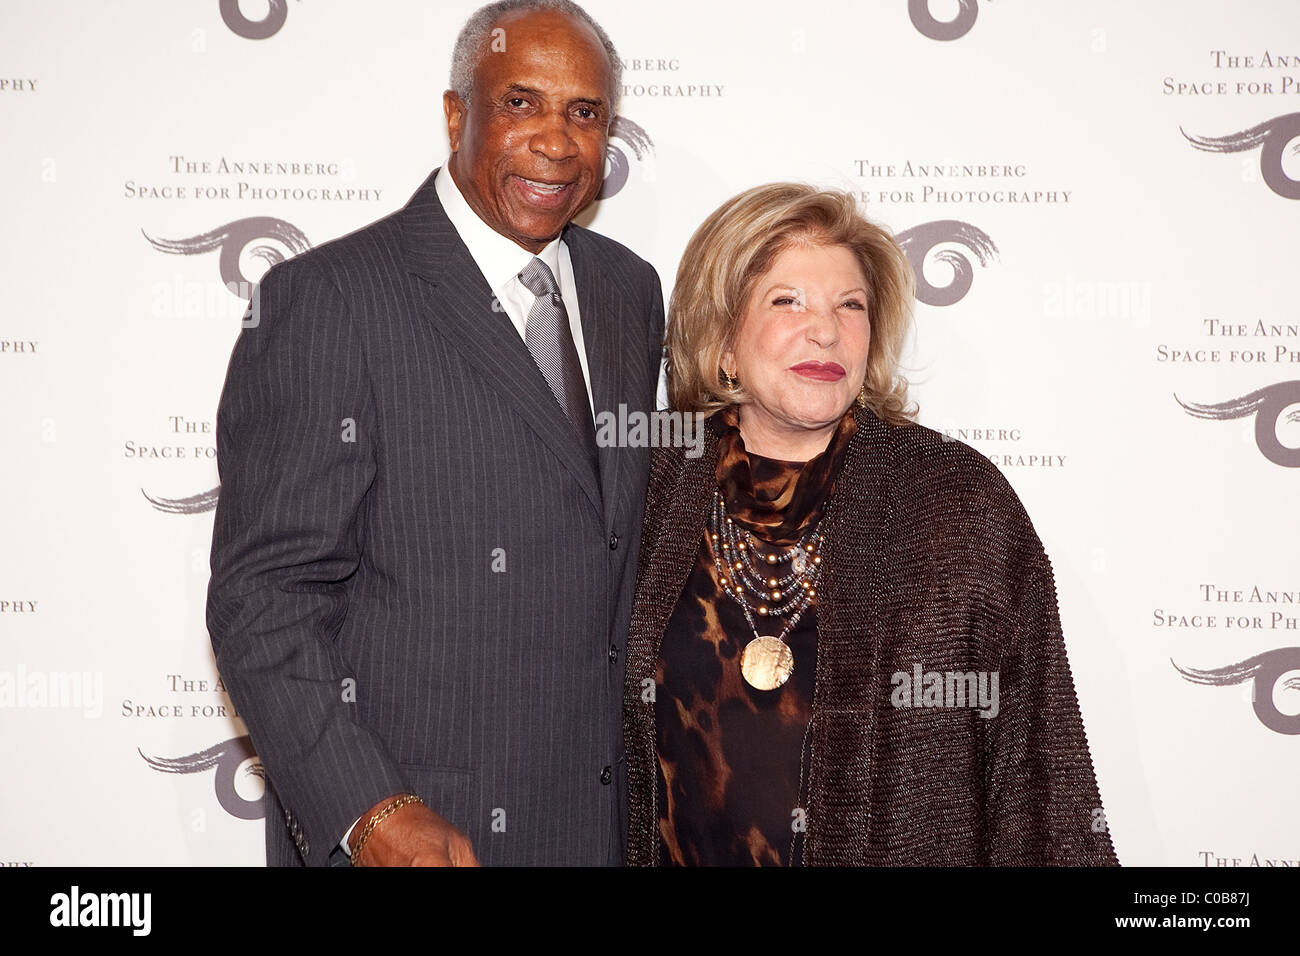 Hall-of-Fame Baseball player and coach, Frank Robinson with Wallis  Annenberg Opening of Legendary Sports photographers Neil Stock Photo - Alamy